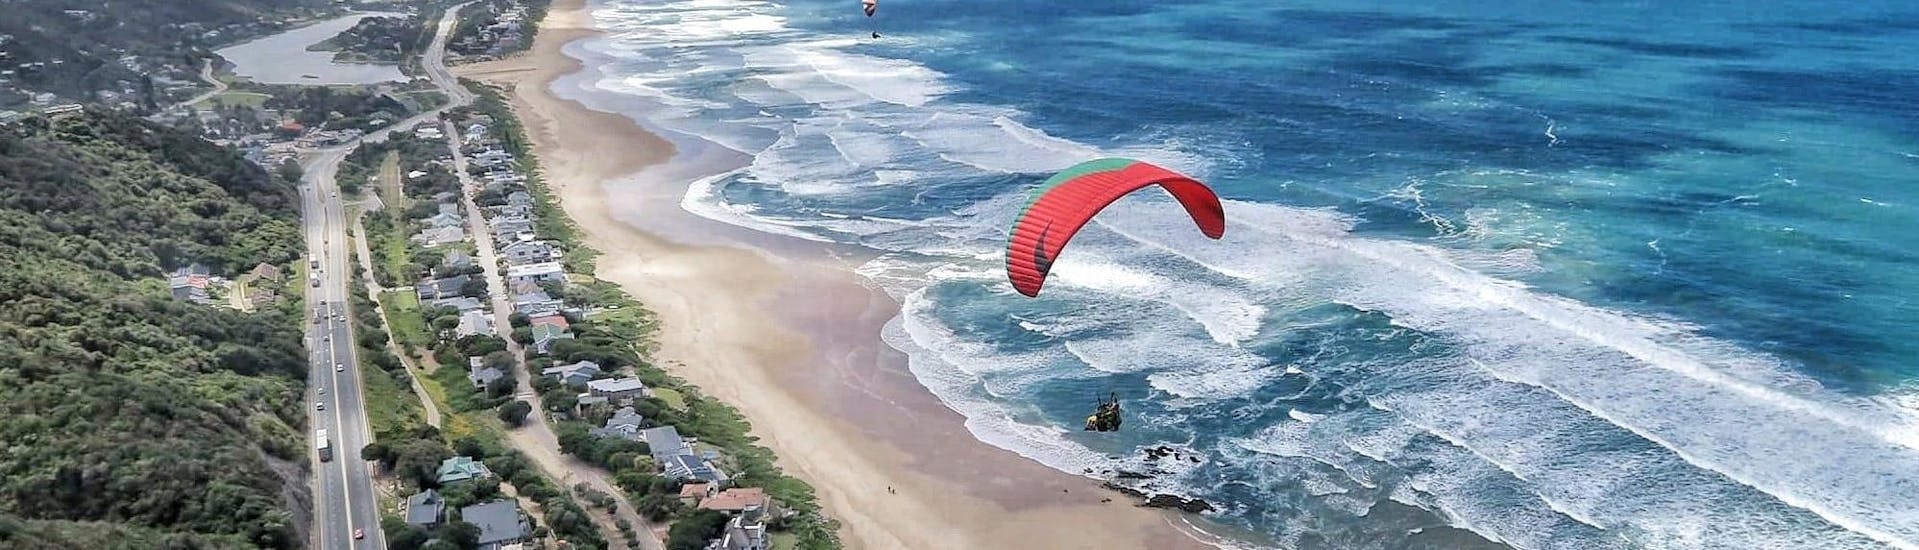 Panorama Tandem Paragliding in Wilderness (ab 4 J.) - Garden Route.